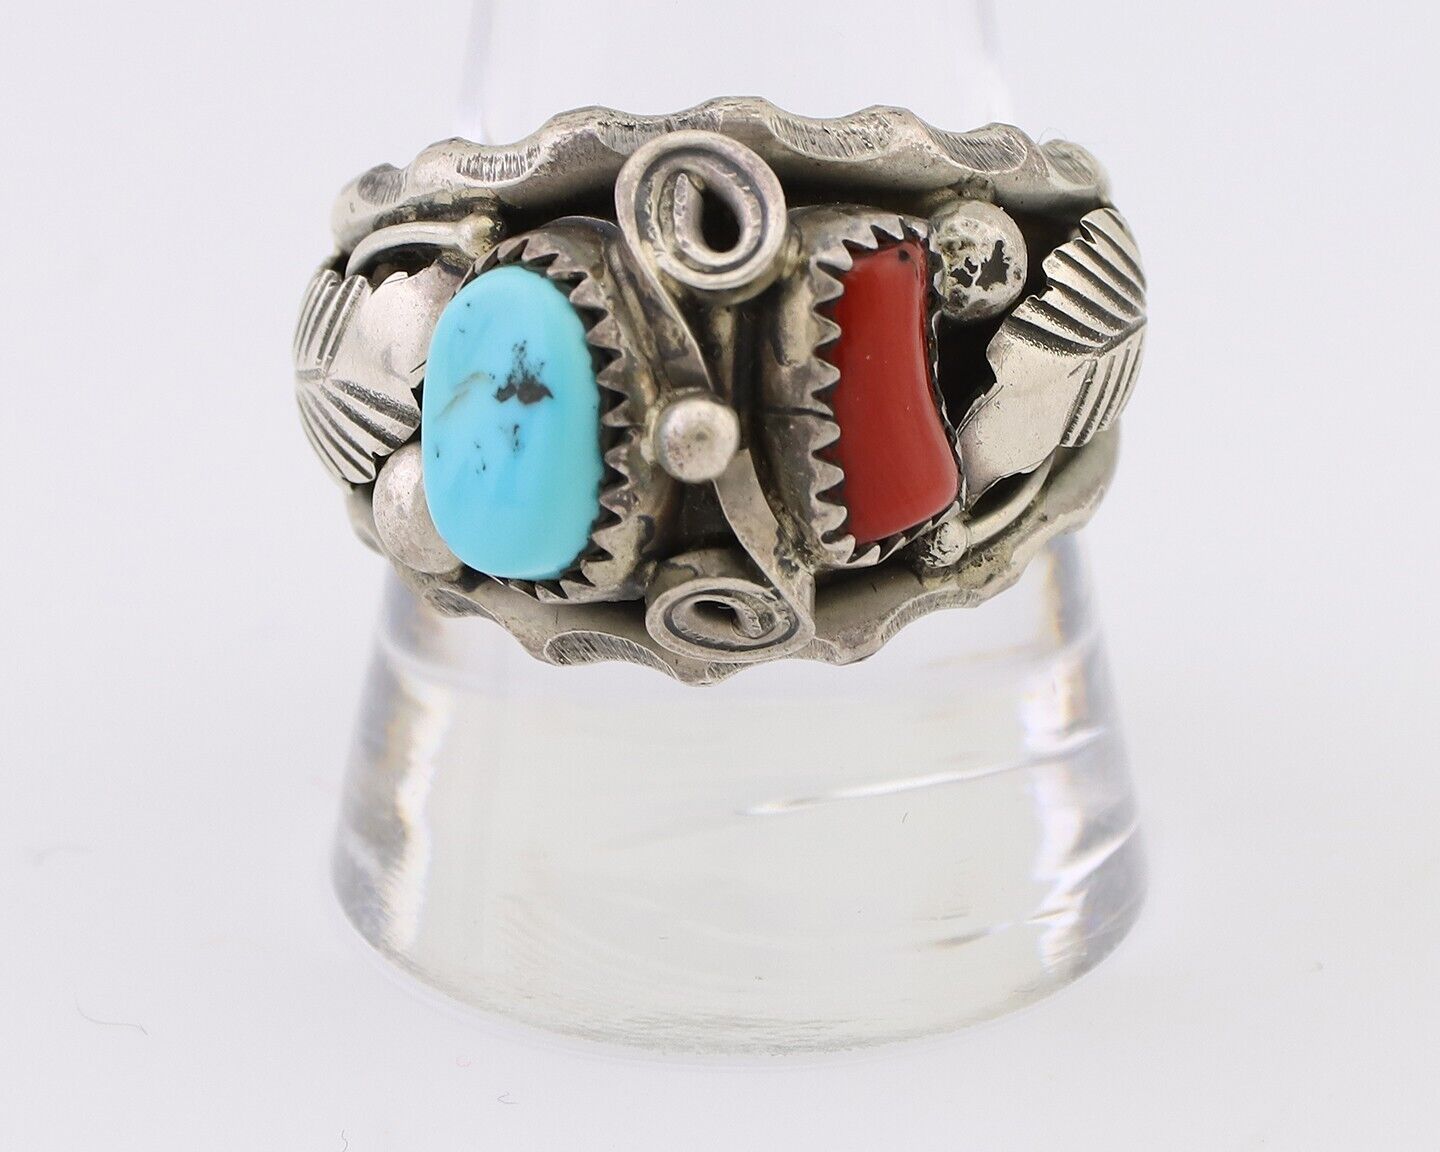 Navajo Ring 925 Silver Coral Turquoise Artist Signed Max Calabaza C.80's